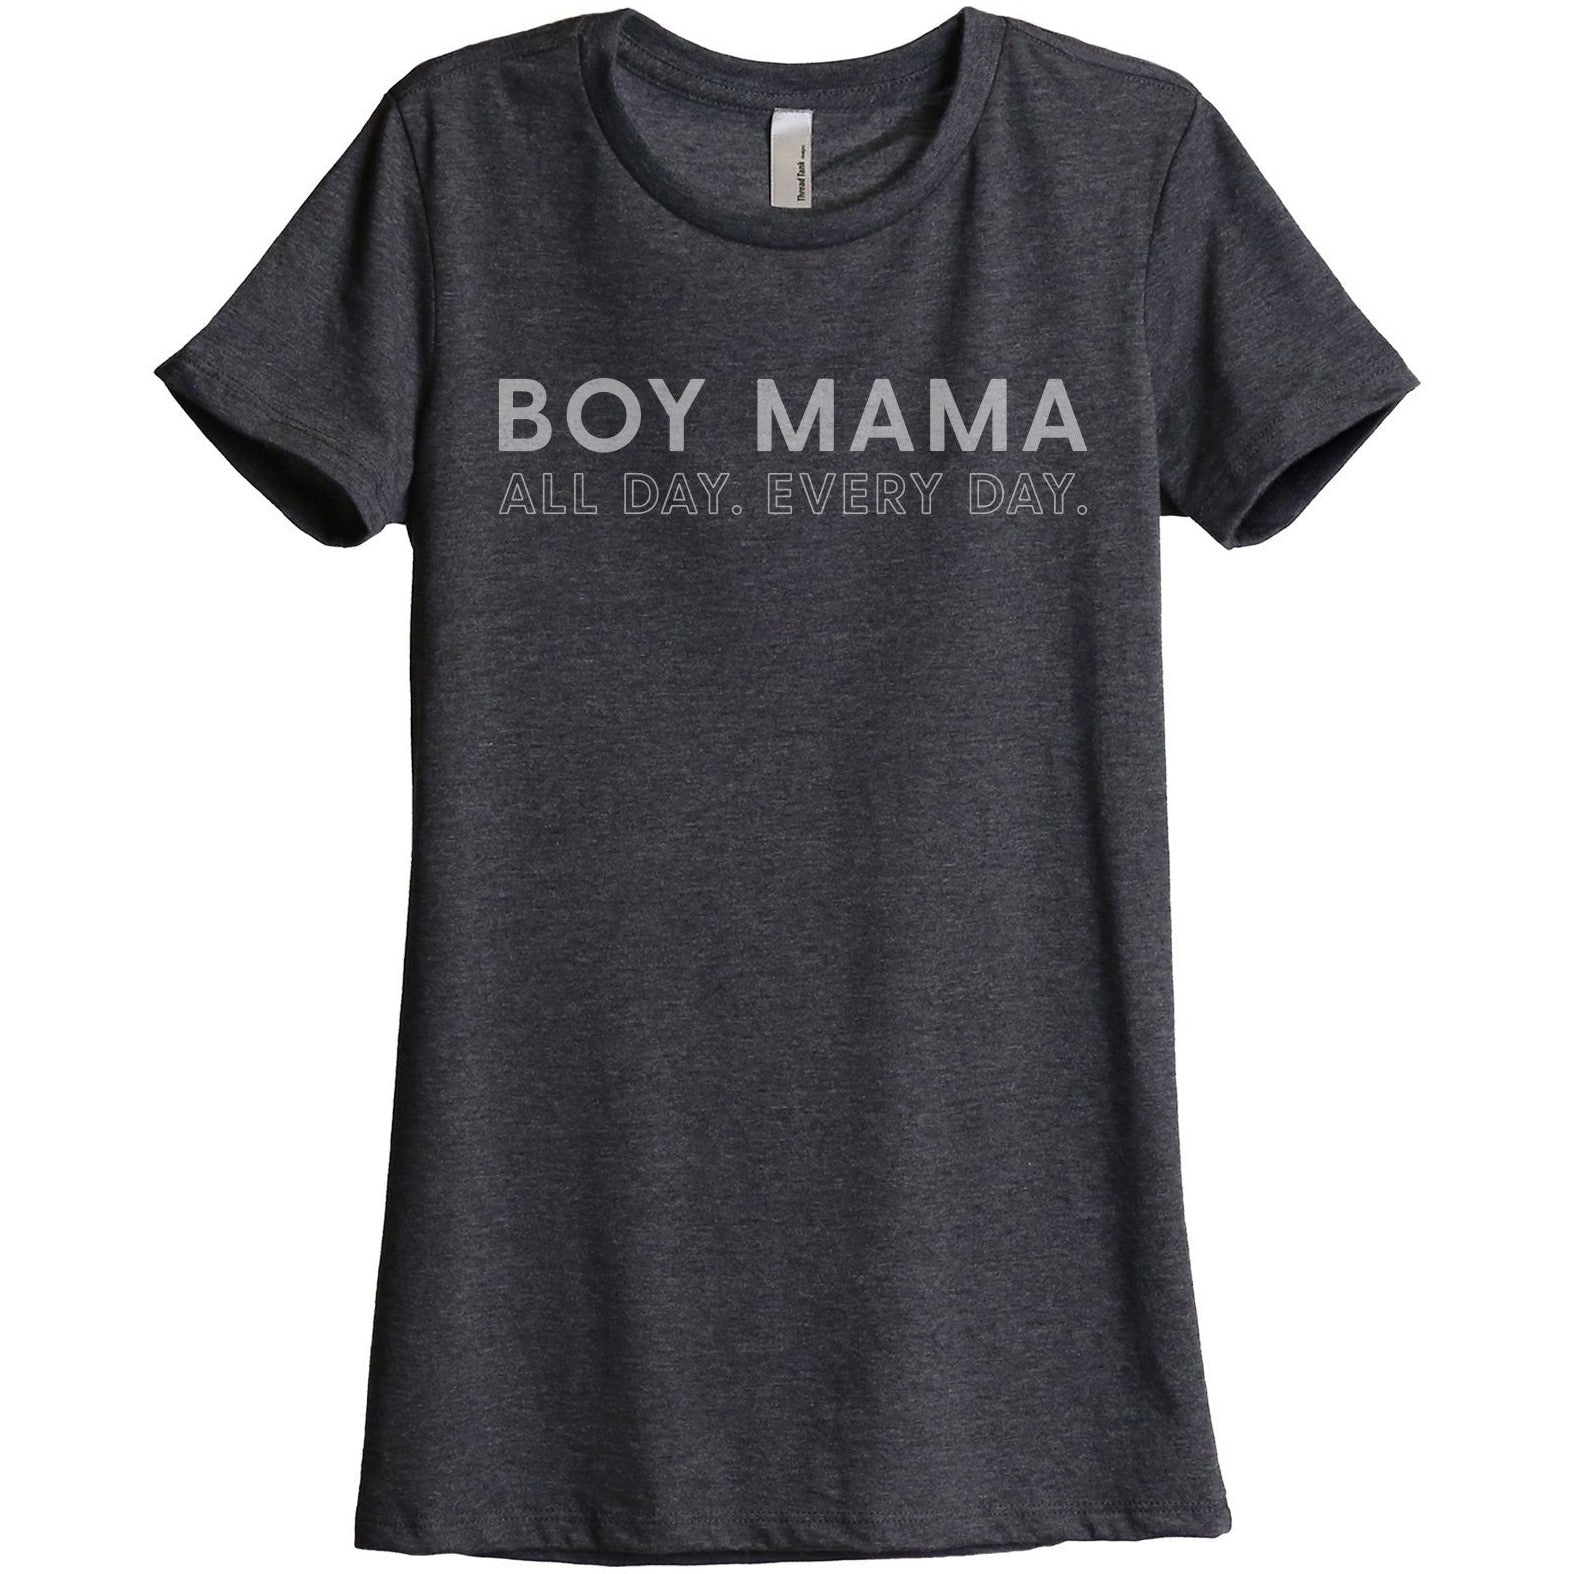 Boy Mama All Day Every Day Women's Relaxed Crewneck T-Shirt Top Tee Charcoal Grey
